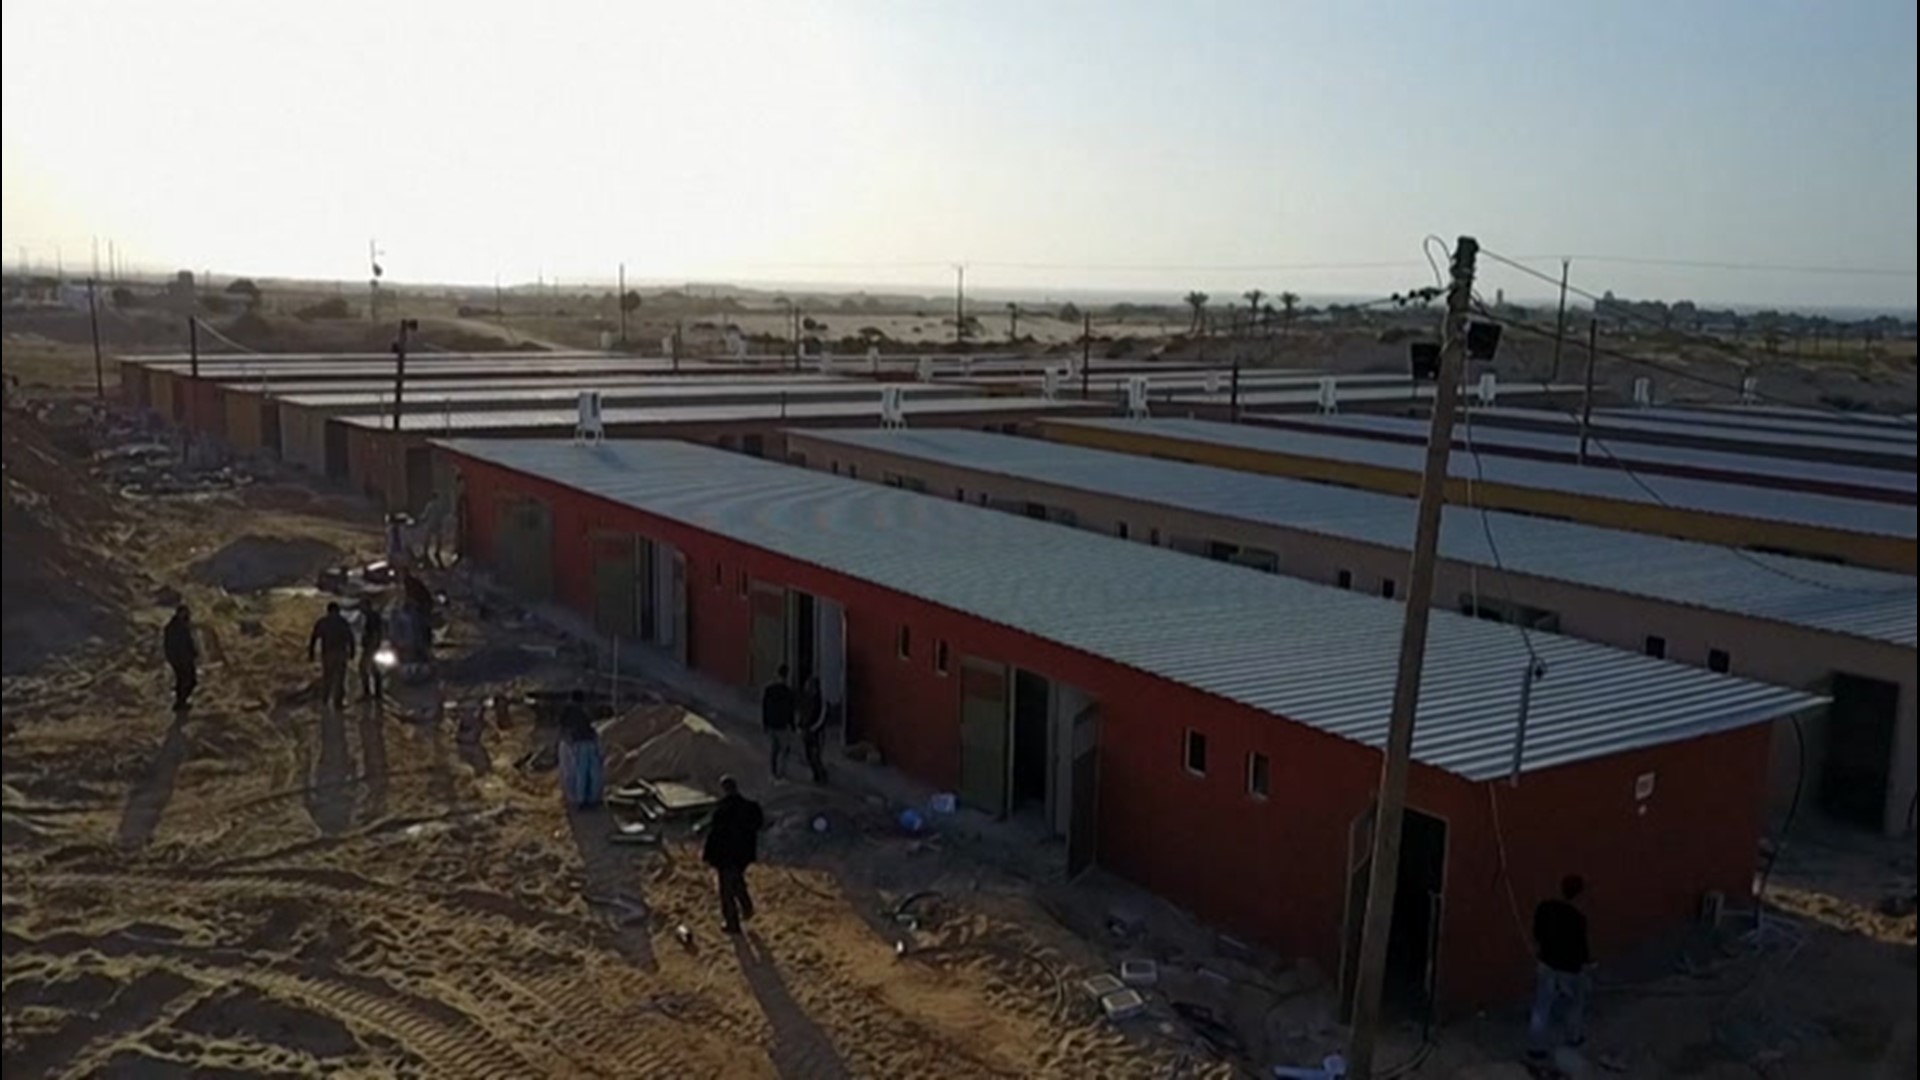 A field hospital was being built in Rafah, Palestinian Territories, on April 1, which will be used to quarantine COVID-19 patients.